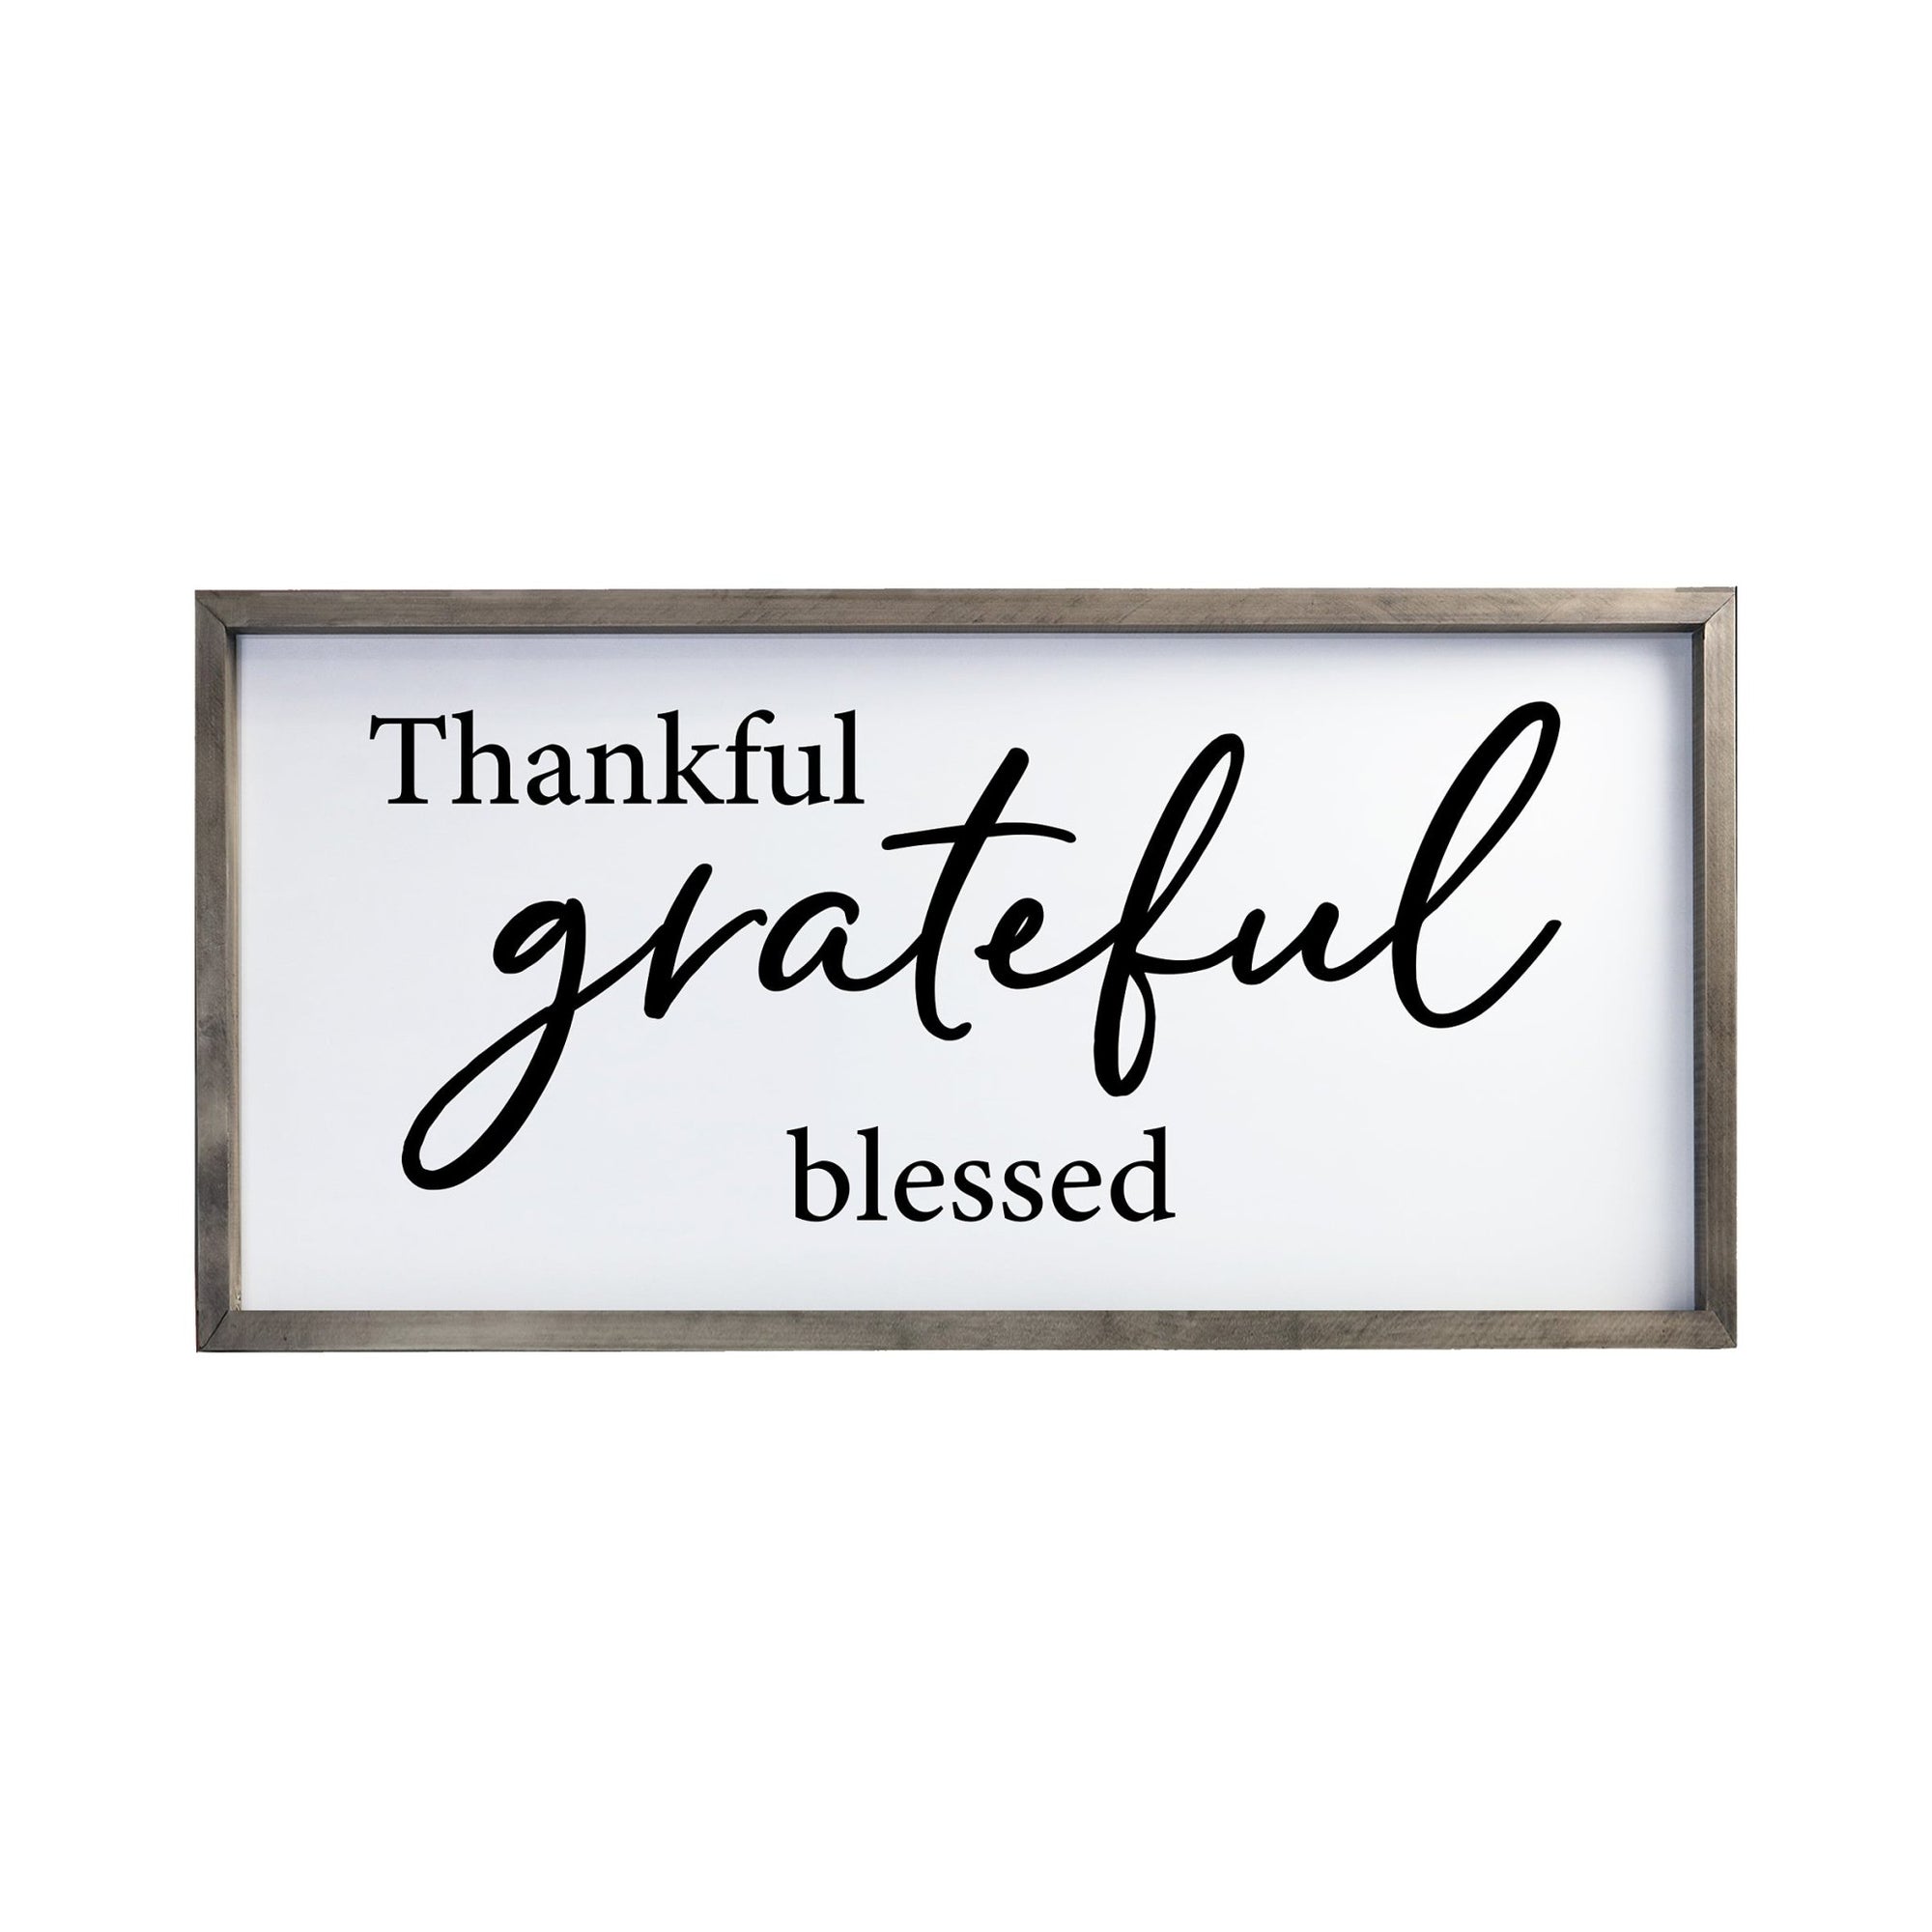 Large Family Wall Decor Quote Sign For Home 18 x 36 - Thankful Grateful Blessed - LifeSong Milestones